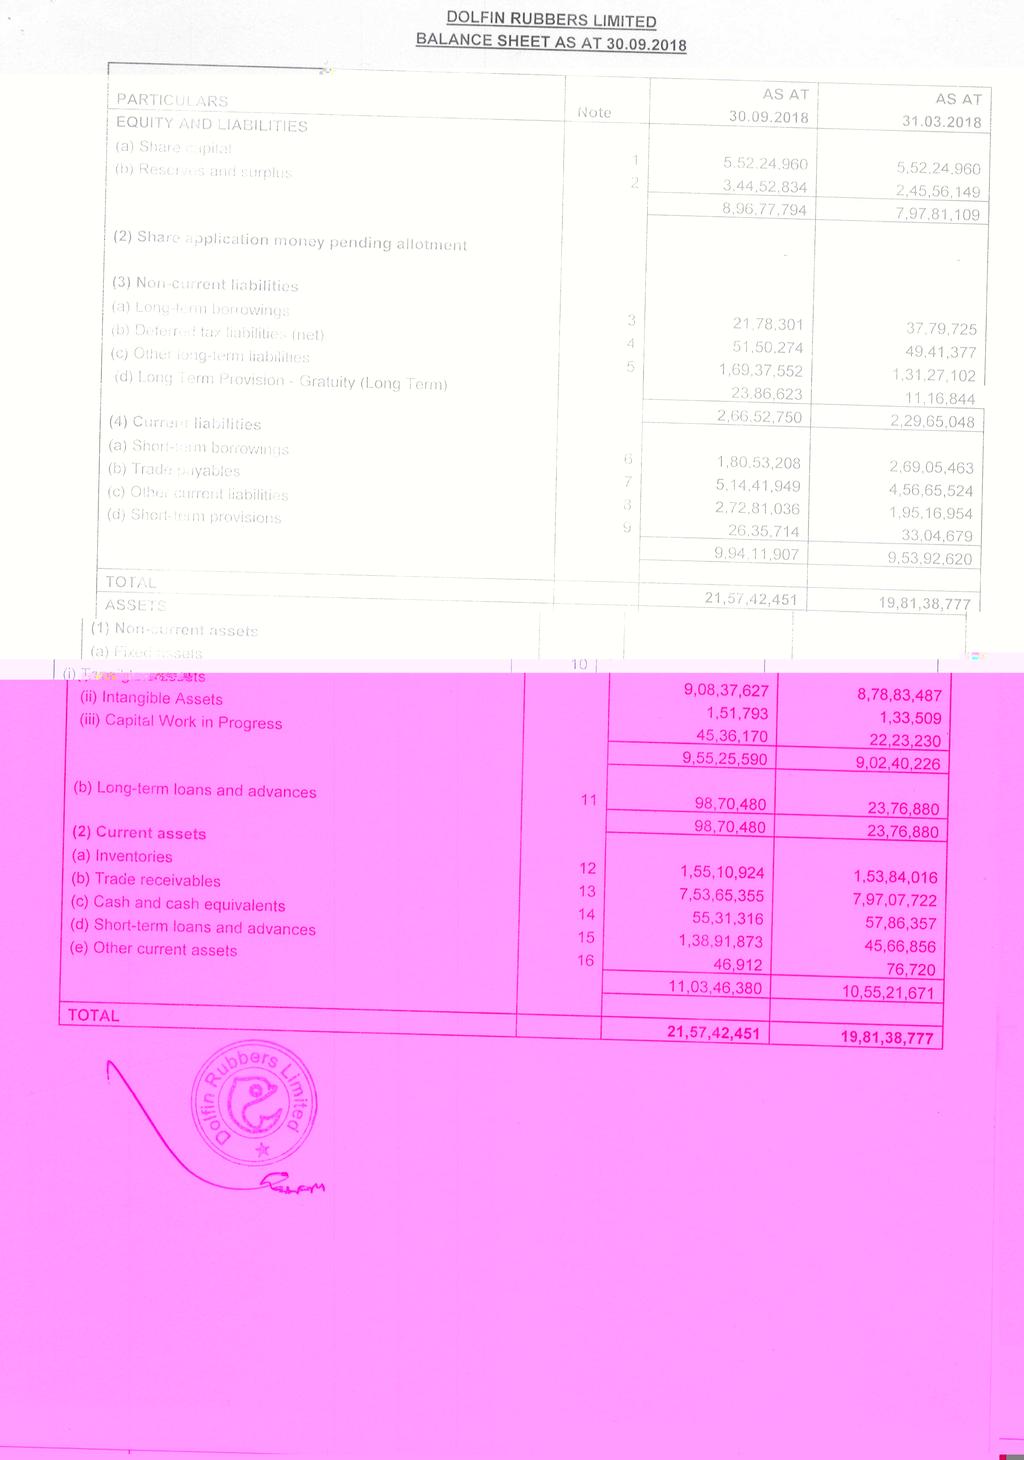 DOLFIN RUBBERS LIMITED BALANCE SHEET AS AT 30.09.2018 PARTICULARS EQUITY AND LIABILITIES (a) Share capital (b) Reserves and surplus (2) Share application money pending allotment Note AS AT AS AT 30.